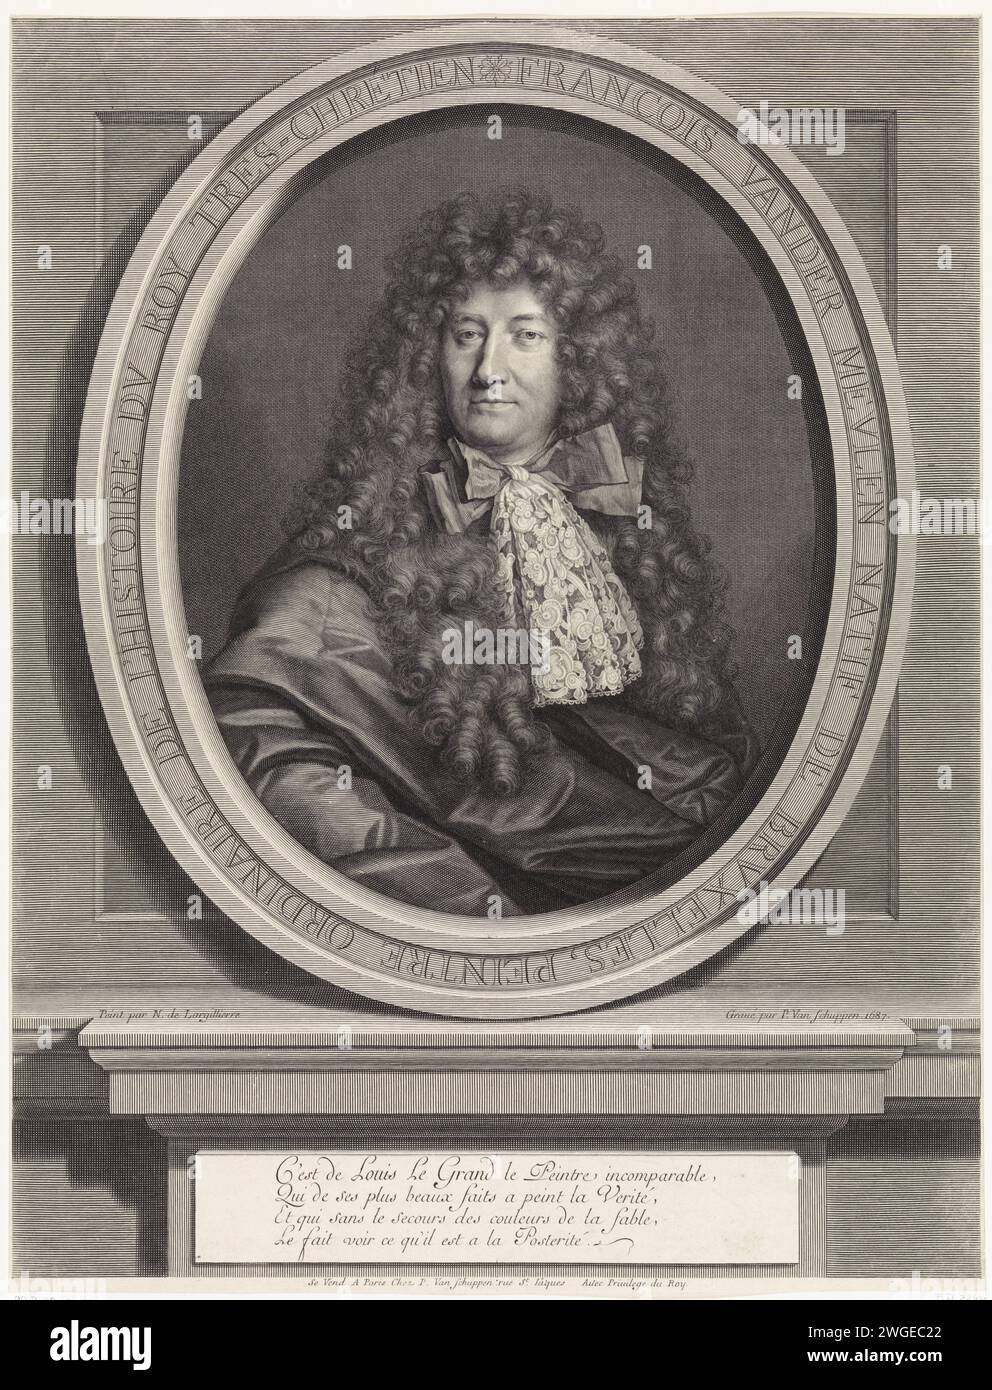 Portrait of Adam Frans van der Meulen, Pieter van Schuppen, After Nicolas de Largillière, 1687 print Portrait of Adam Frans van der Meulen, history painter of the French king Louis XIV. On the Pieth stable there is a praise on his truthful and unadorned representation of the king's feases. Paris paper engraving portrait, self-portrait of painter Stock Photo